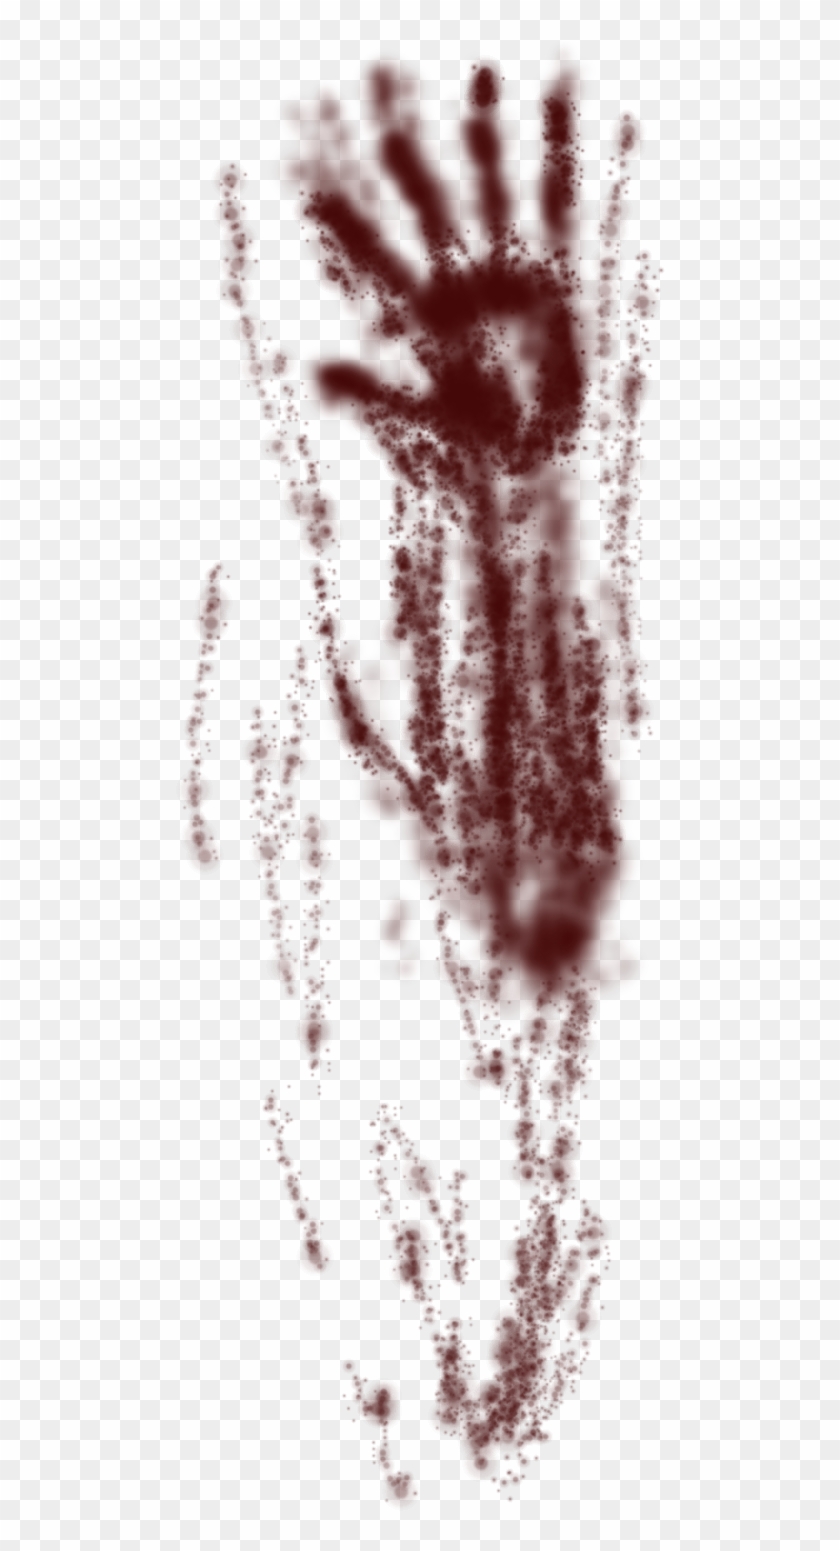 Bloody Handprint Smear Png For Kids Clipart #15159